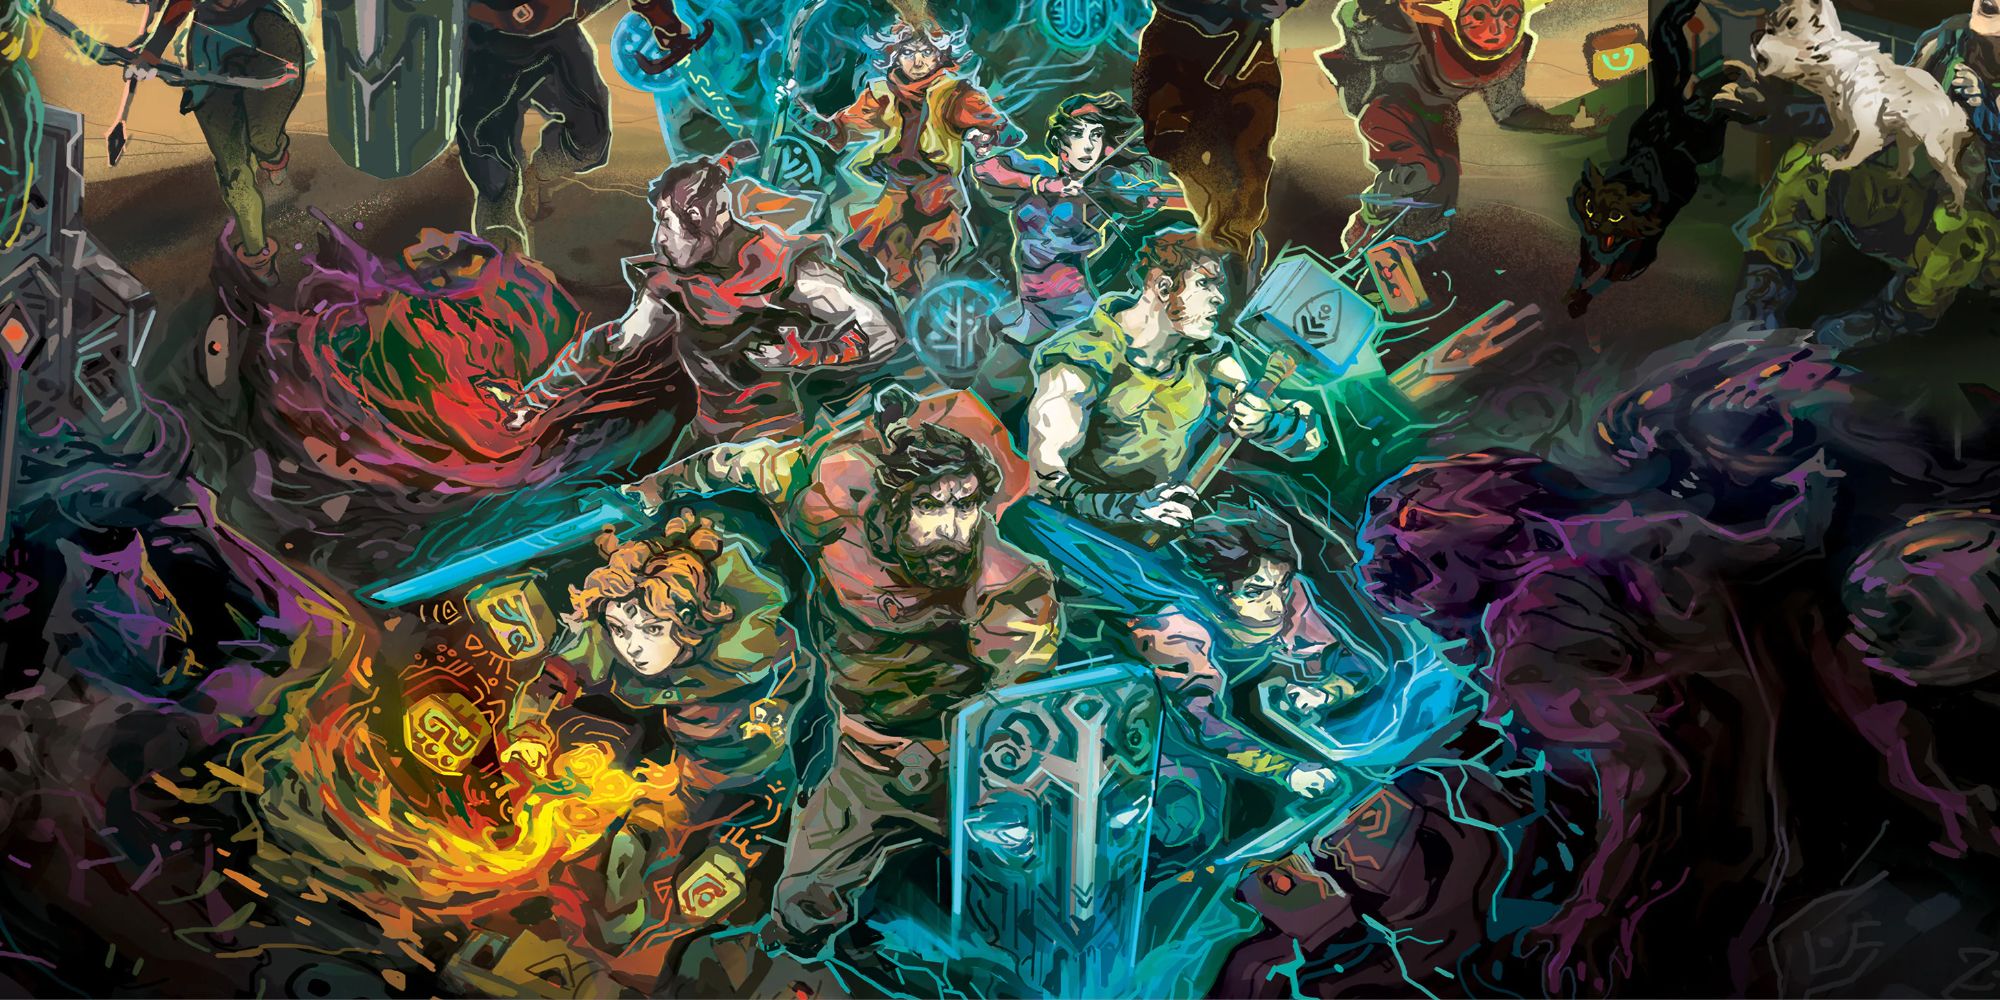 Key art for Children of Mortal: Complete Edition, showing a party of adventurers surrounded by encroaching enemies.